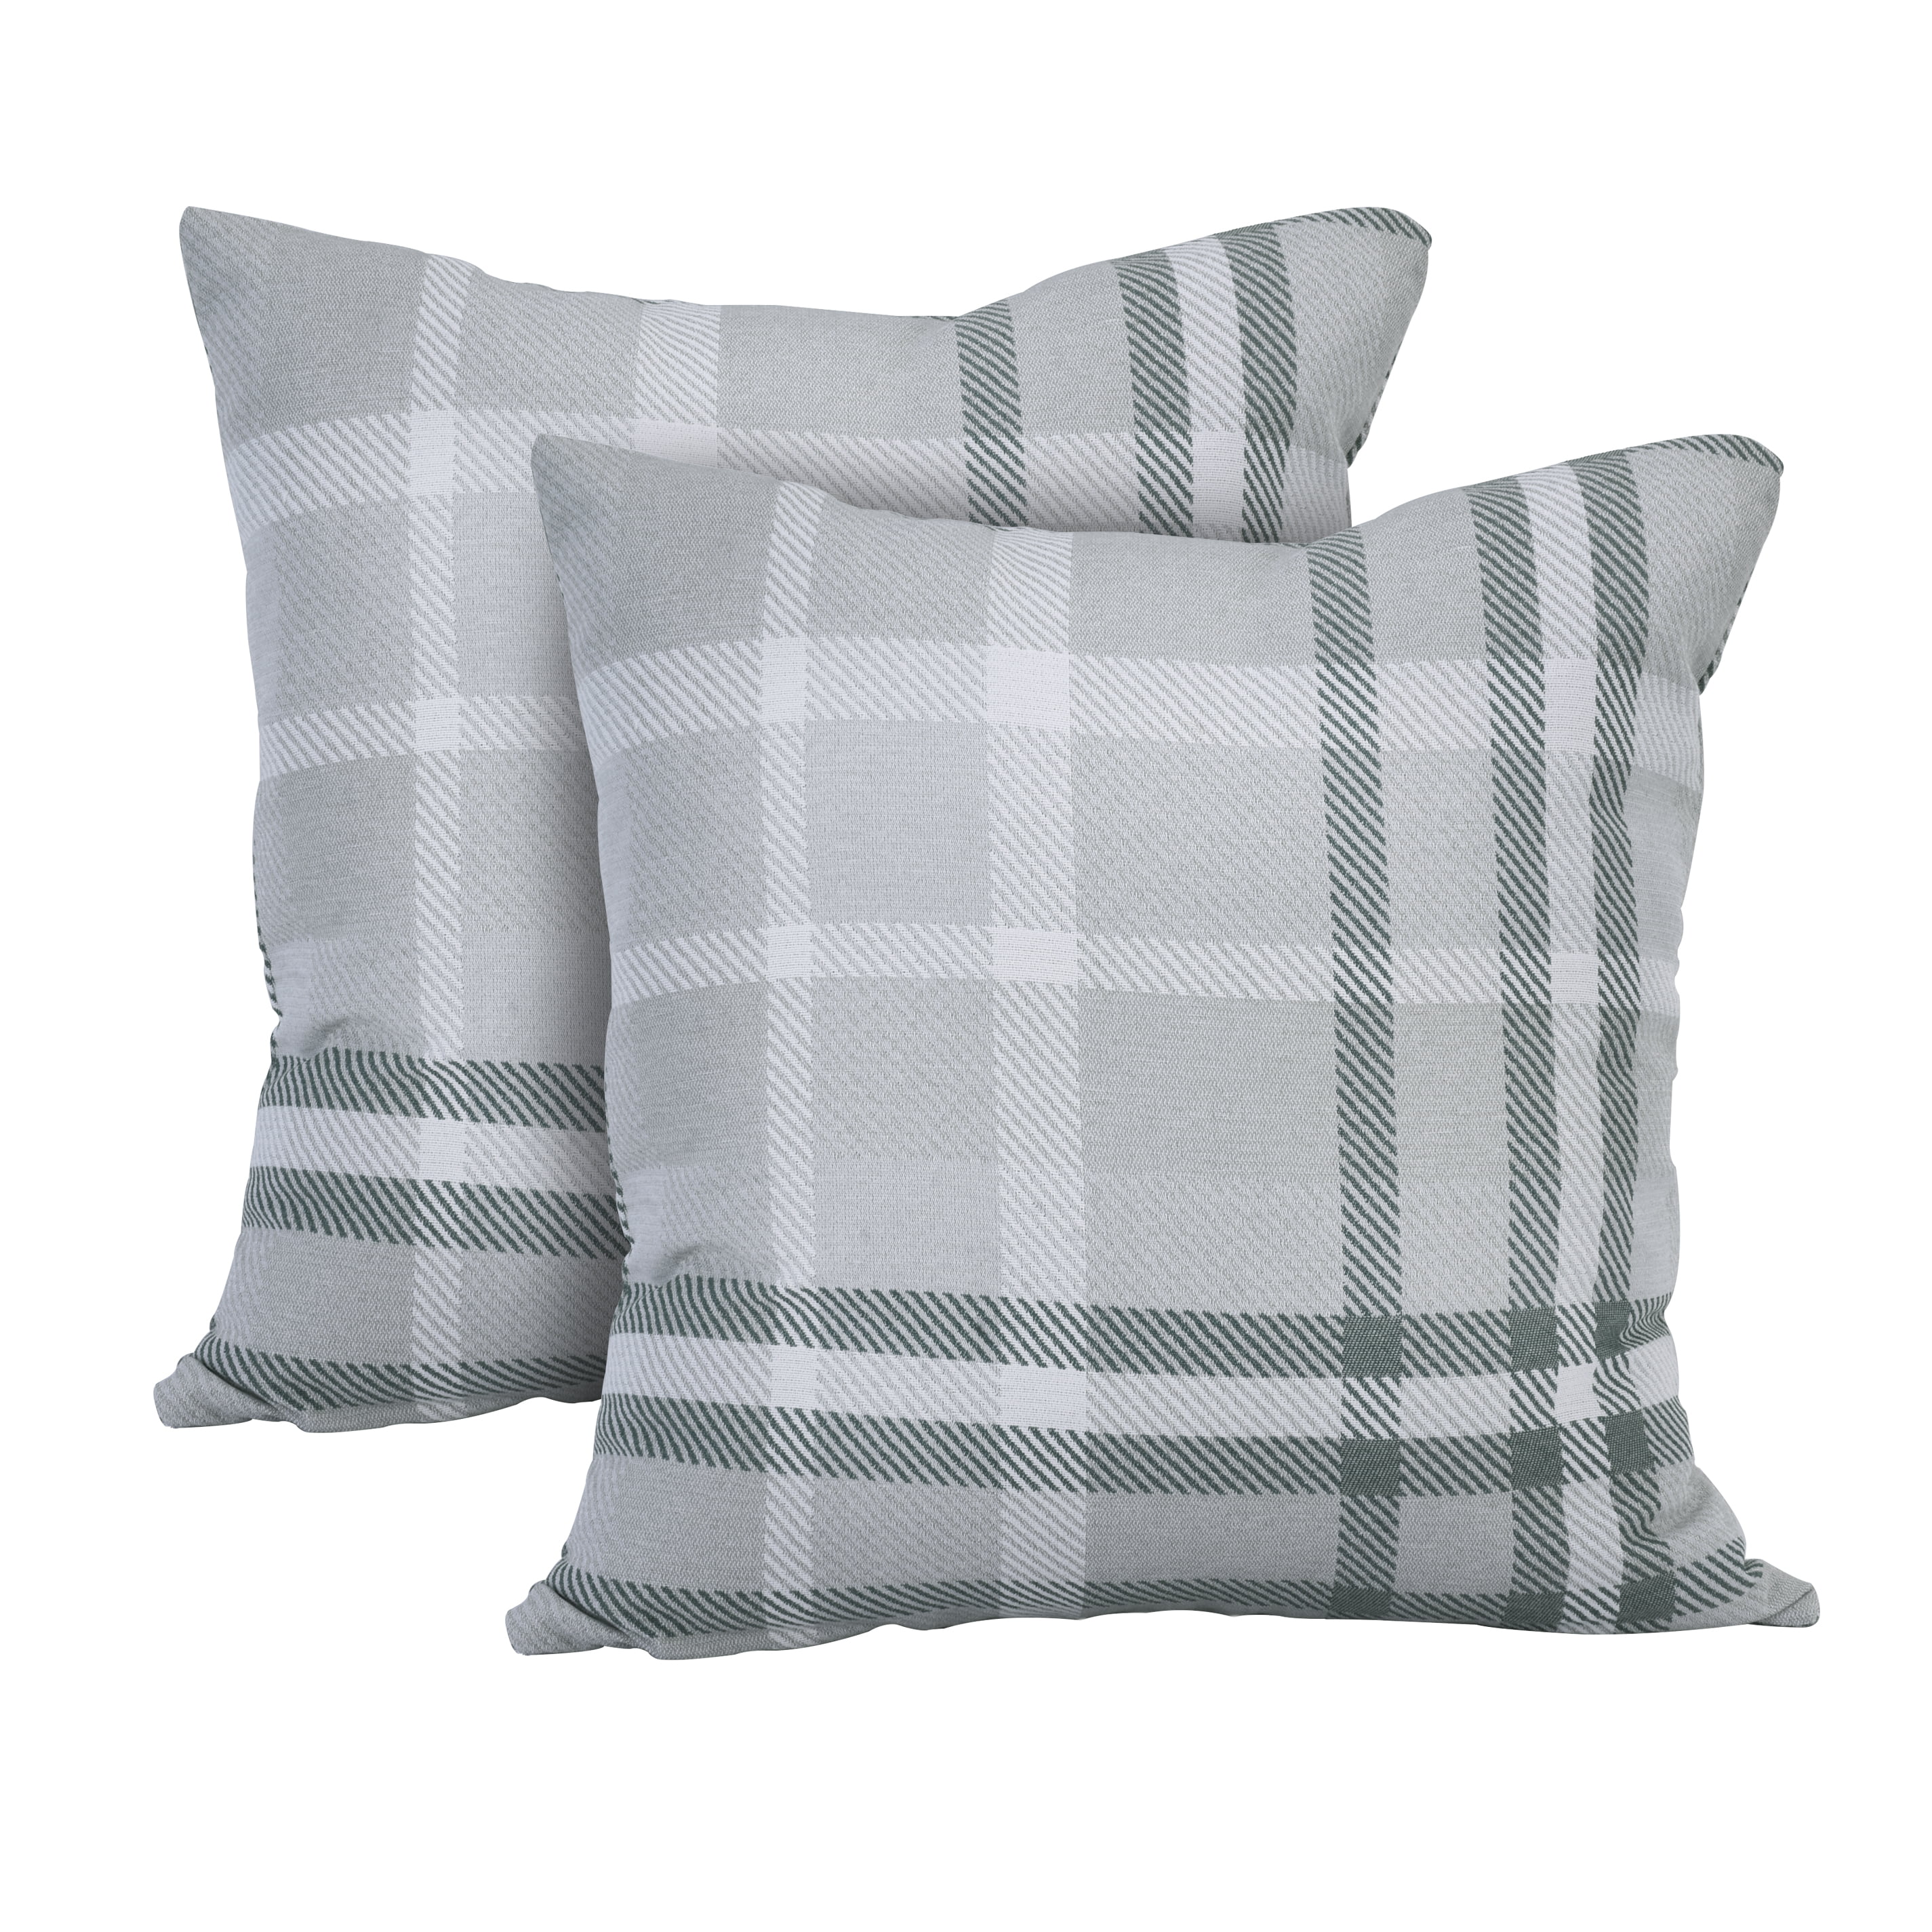 Pacifica Lounge 24 x 24 Outdoor Throw Pillow by Astella, Set of 2 in ...